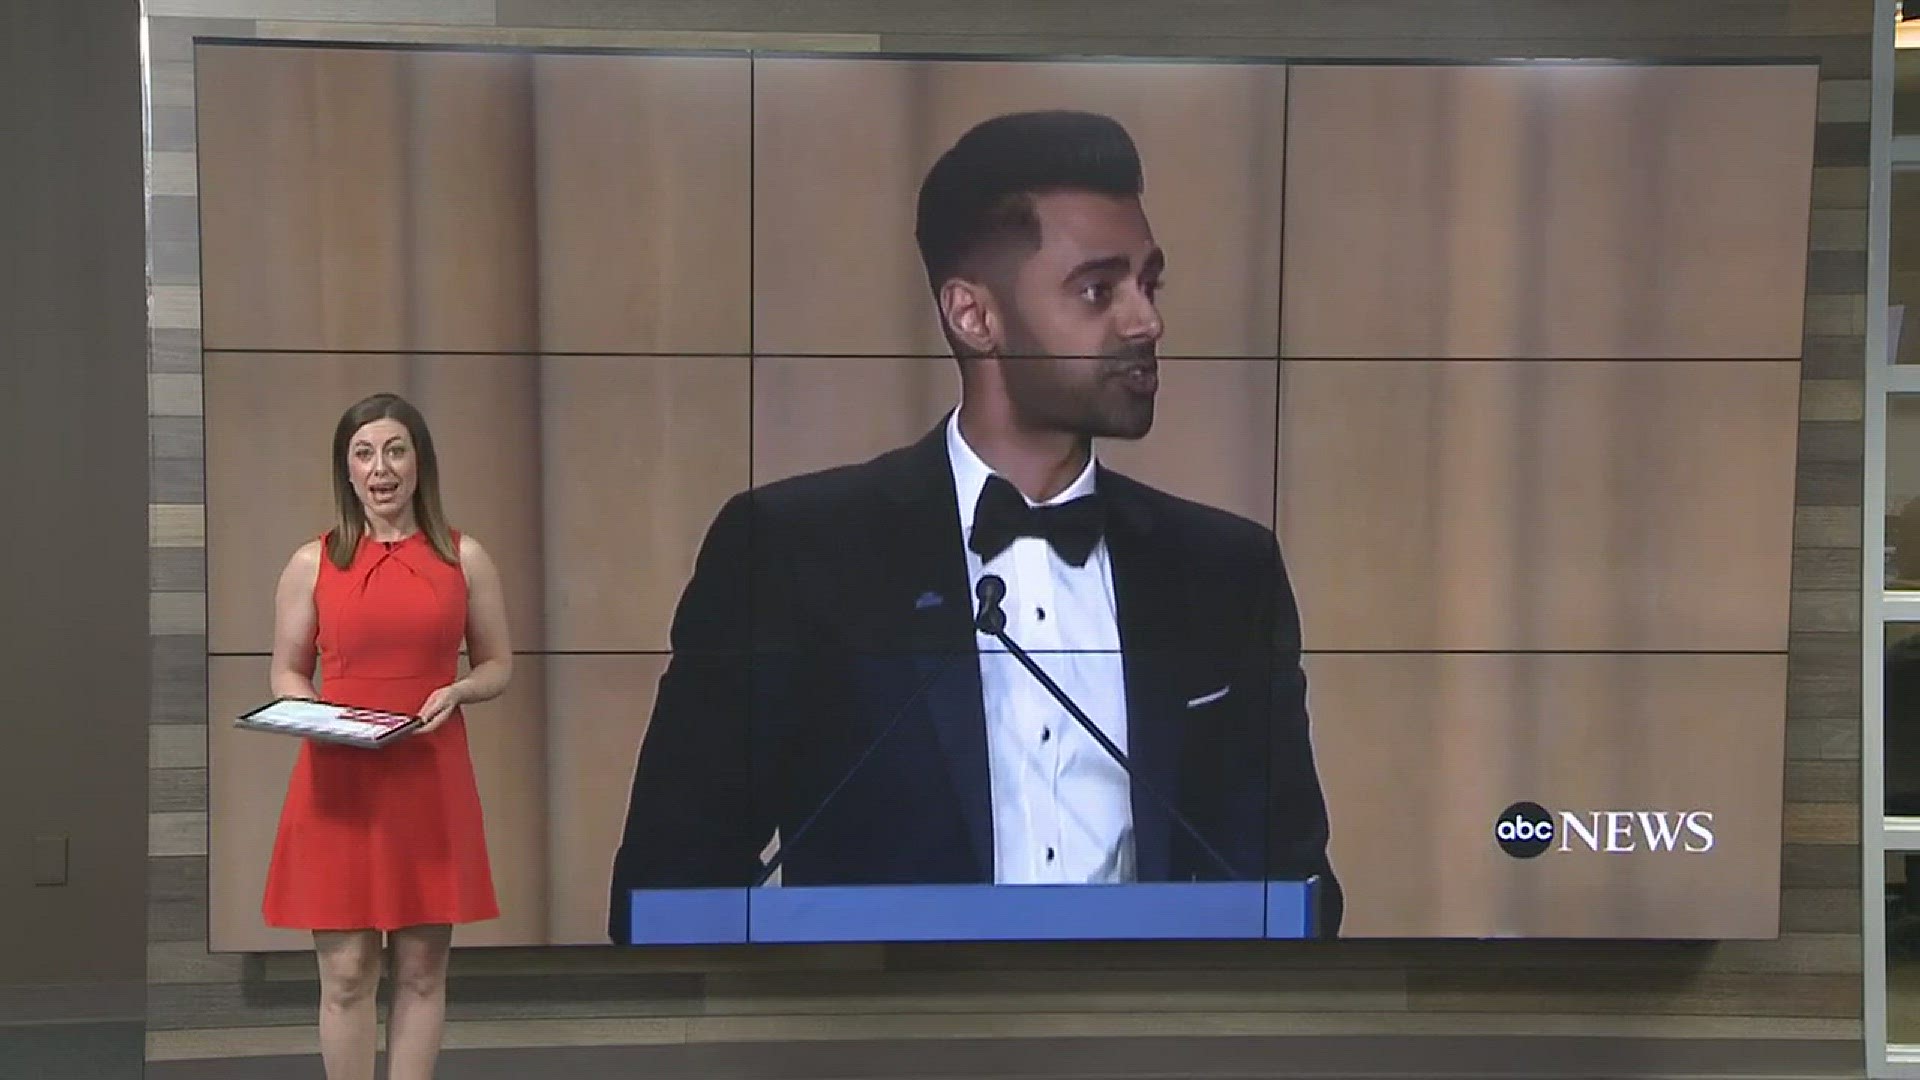 'The Daily Show' senior correspondent Hasan Minhaj, a UC Davis alum, took jabs at the president and press core at the White House Correspondent's Dinner (May 1, 2017)